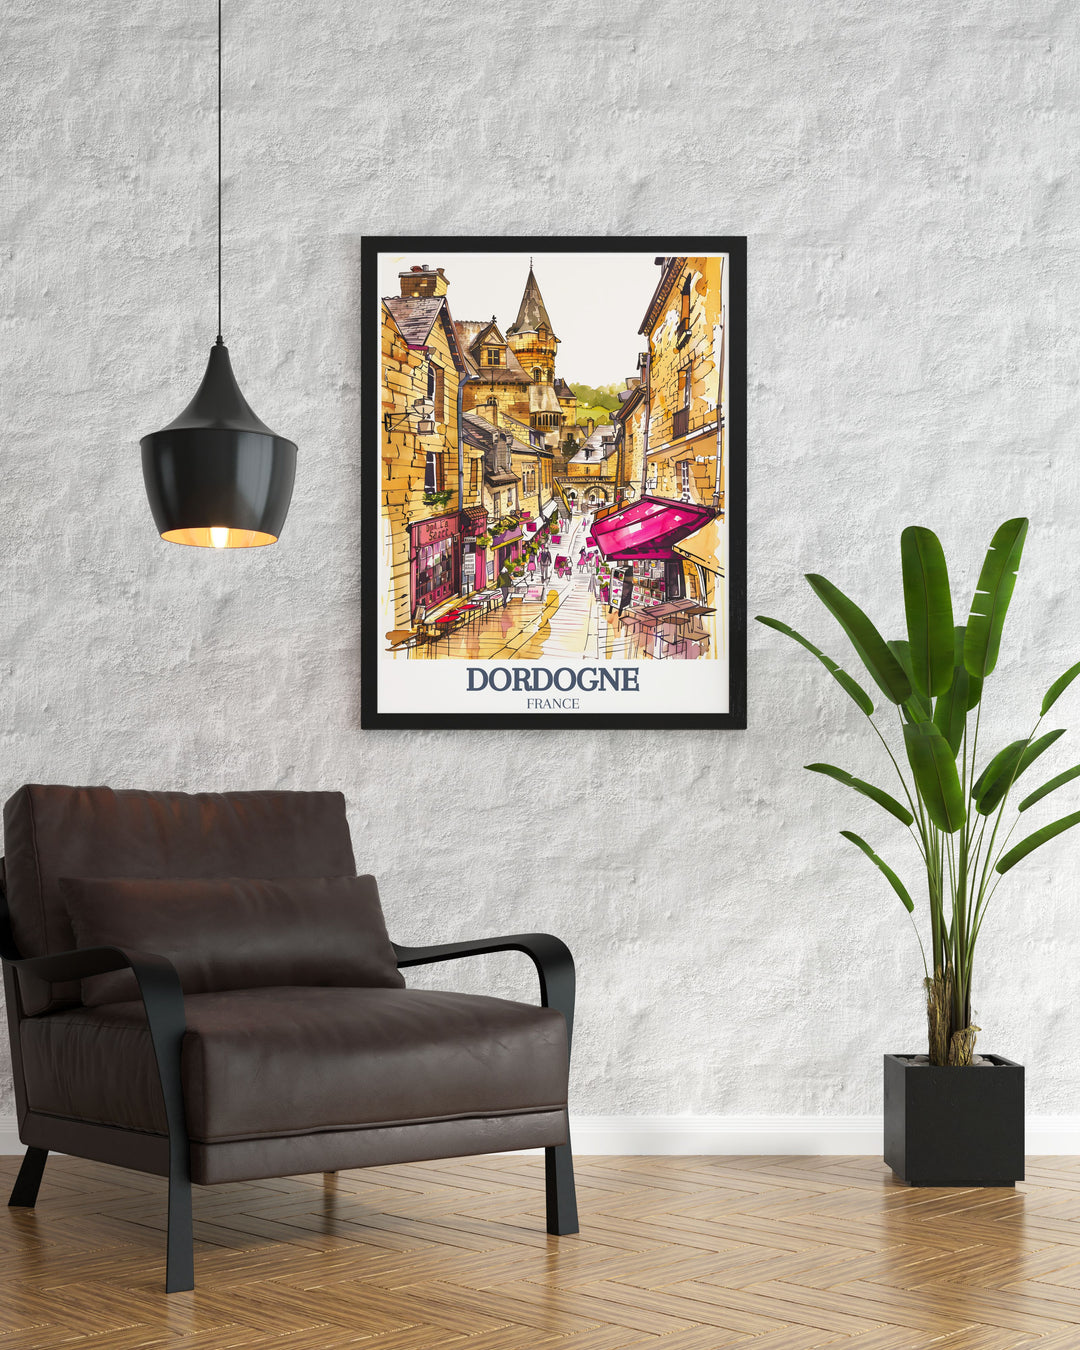 High quality Sarlat la Caneda, Cathedral of Saint Sacerdos at Sarlat vintage print capturing the timeless elegance and rich history of this majestic French cathedral